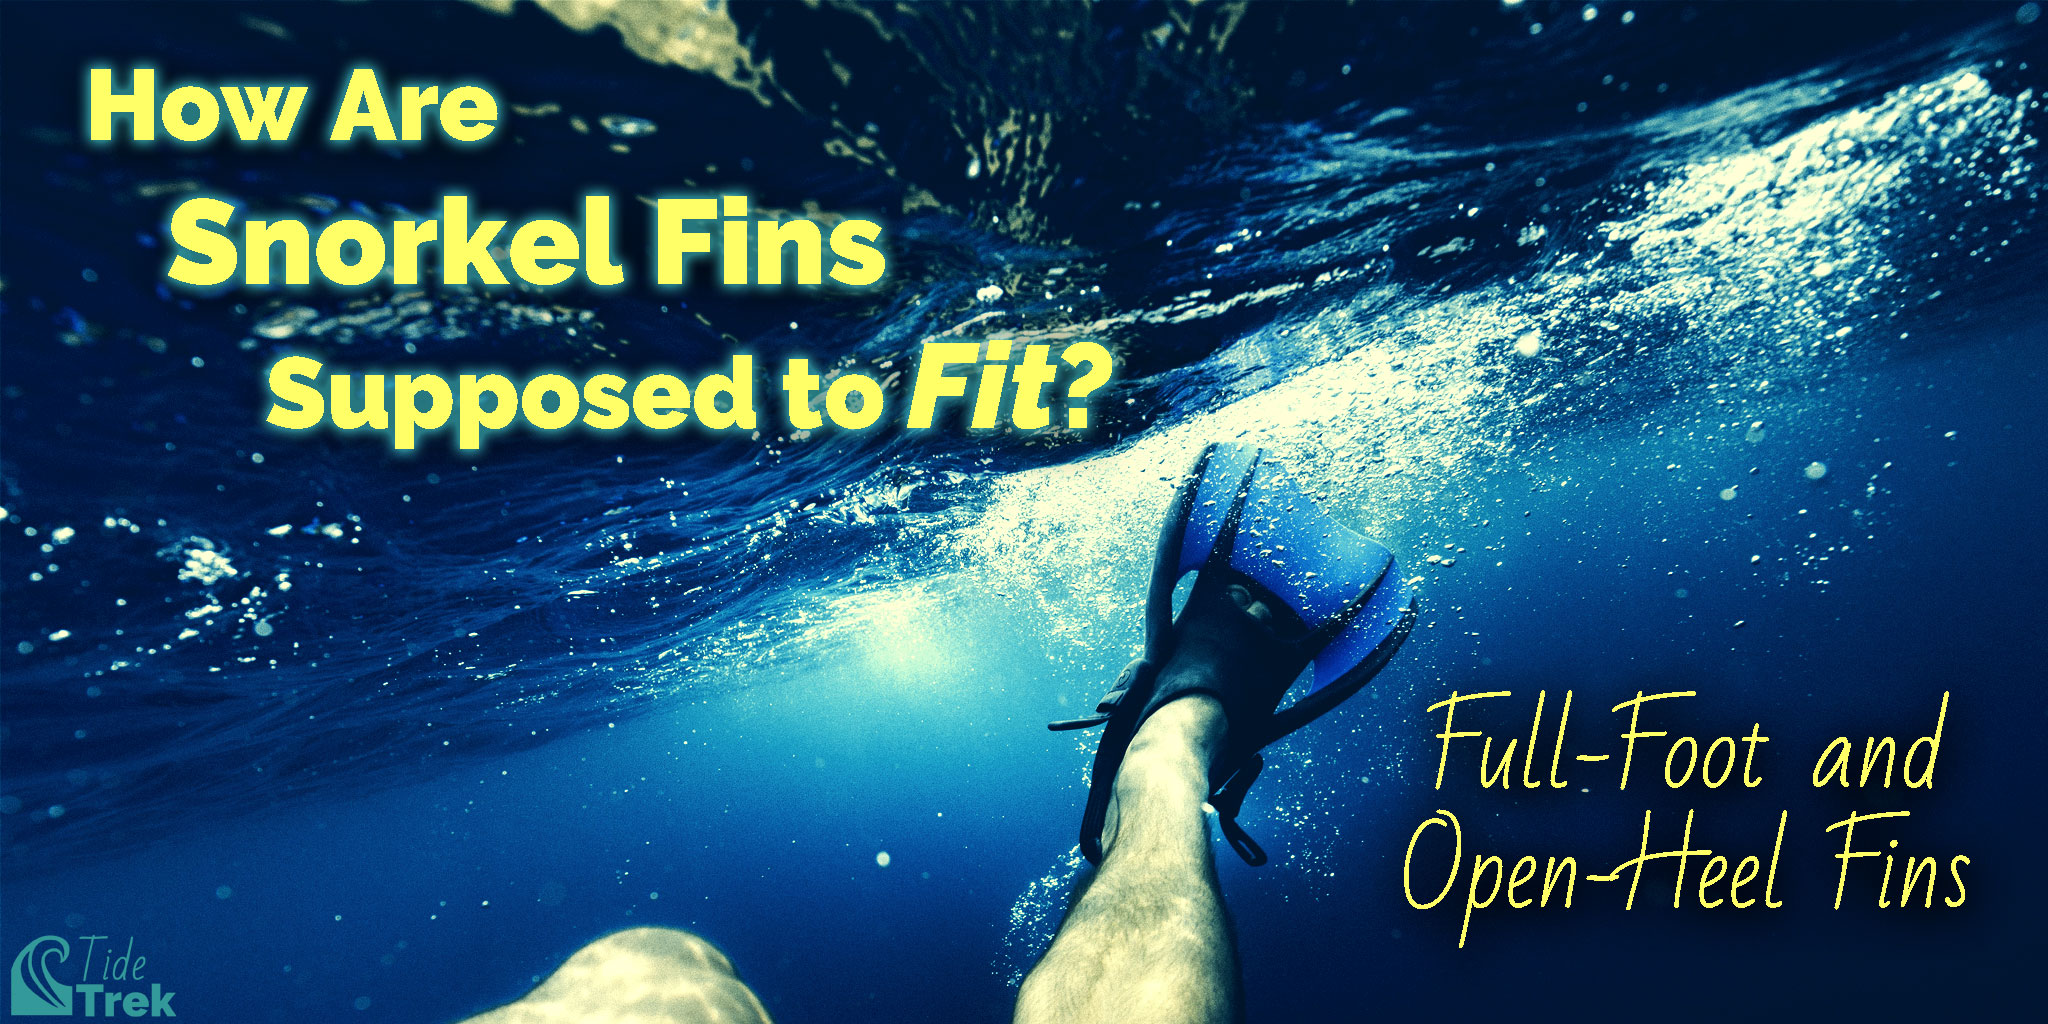 How should your snorkel fins fit? Full-foot and open-heel fins